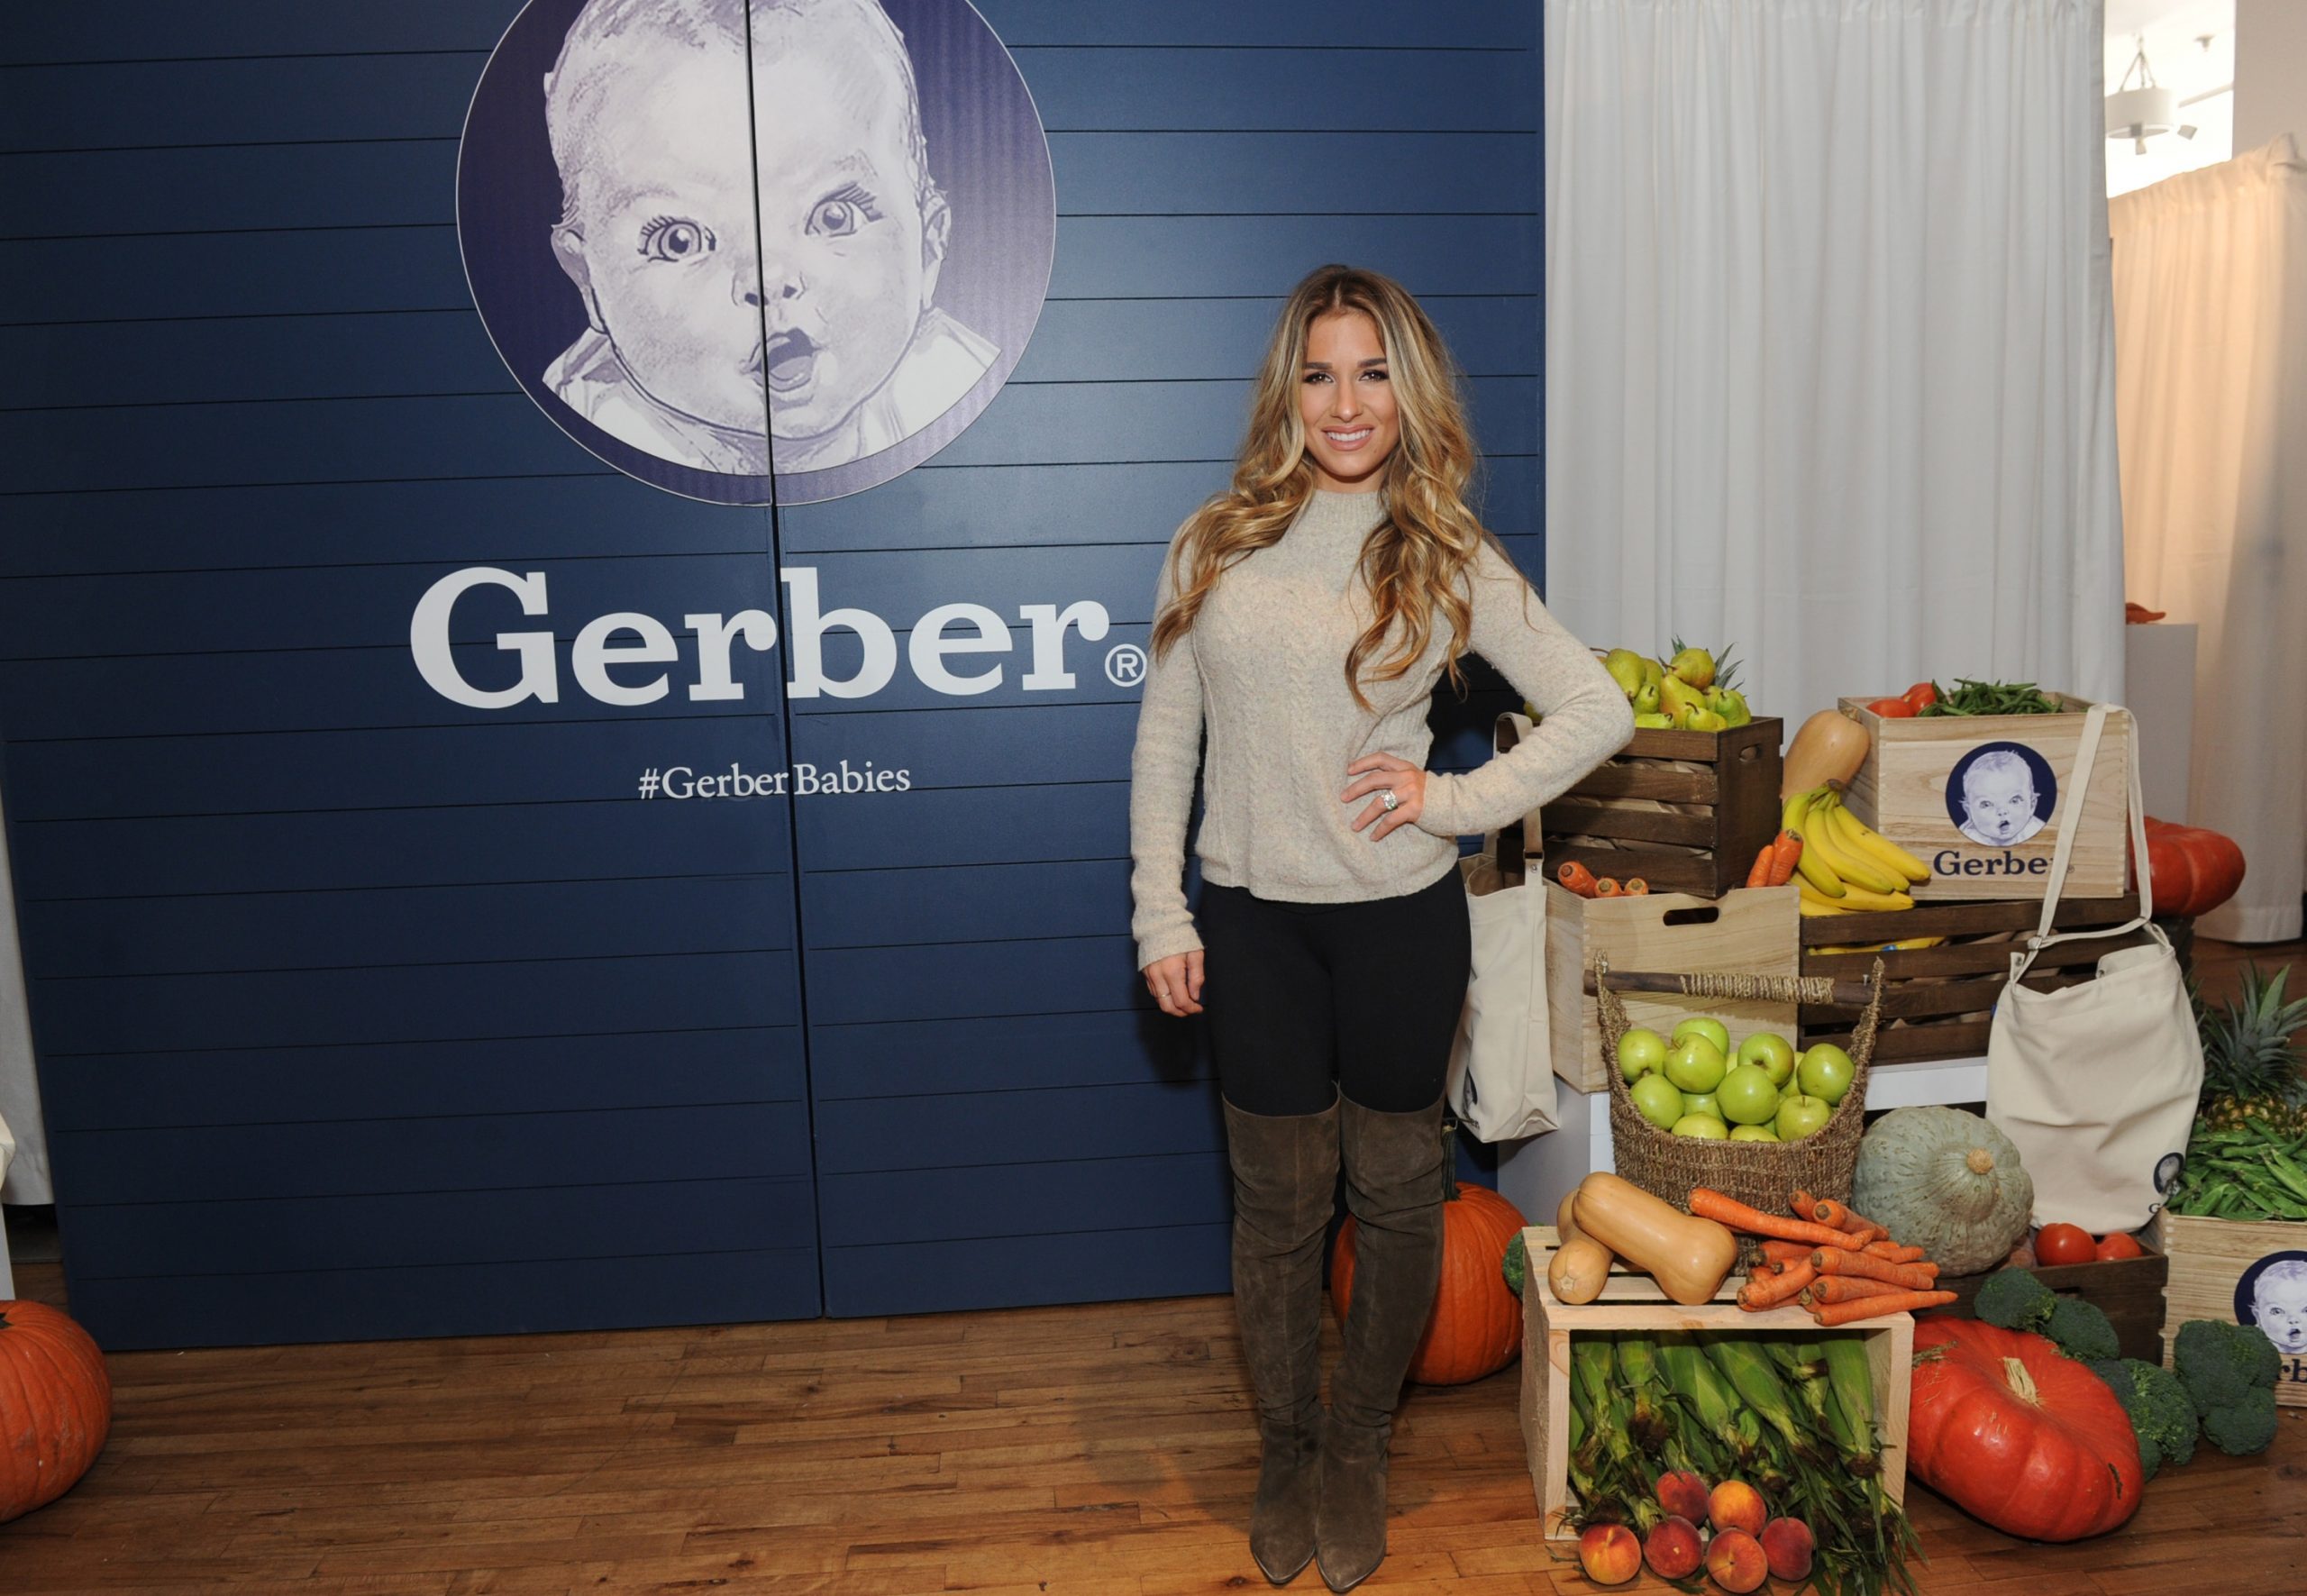 Celebrity mom Jessie James Decker hosts a behind-the-scenes Gerber Babies event in New York, Tuesday, Sept. 27, 2016, to showcase the ìFarm to Highchairî story. (Photo by Diane Bondareff/Invision for Gerber/AP Images)